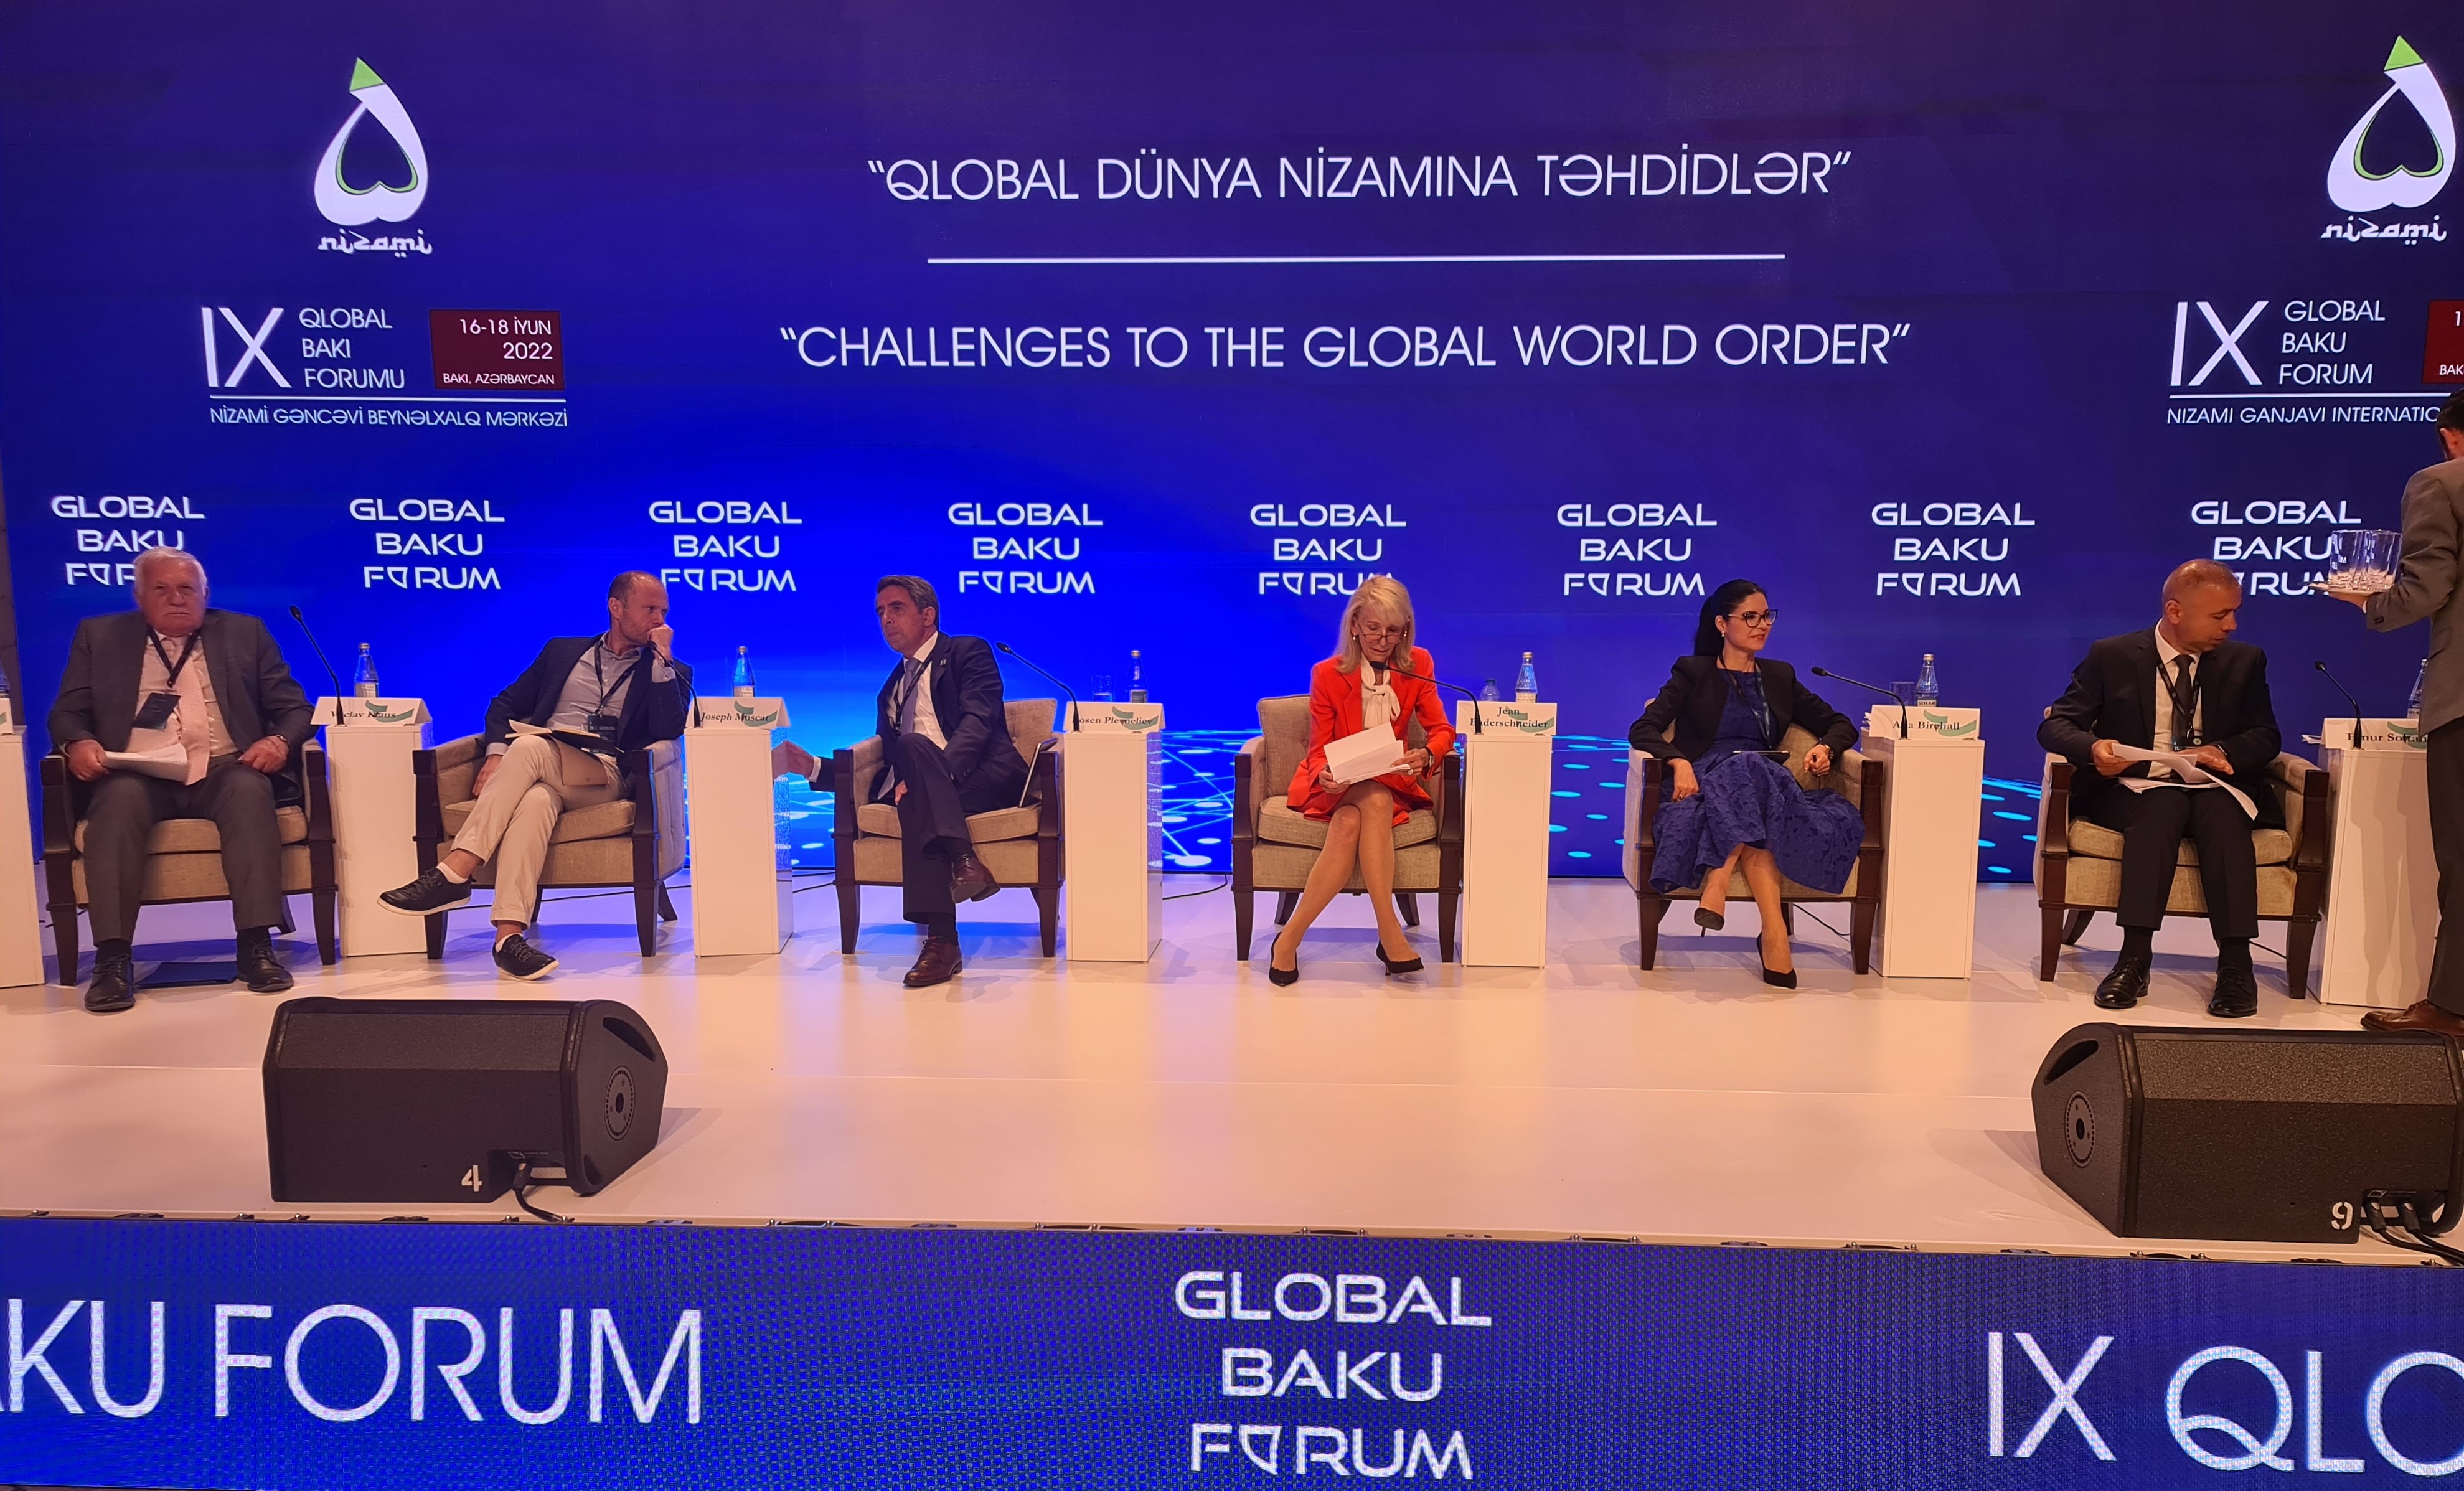 GlobalBakuForum : « Challenges to the global world order », une réalité.